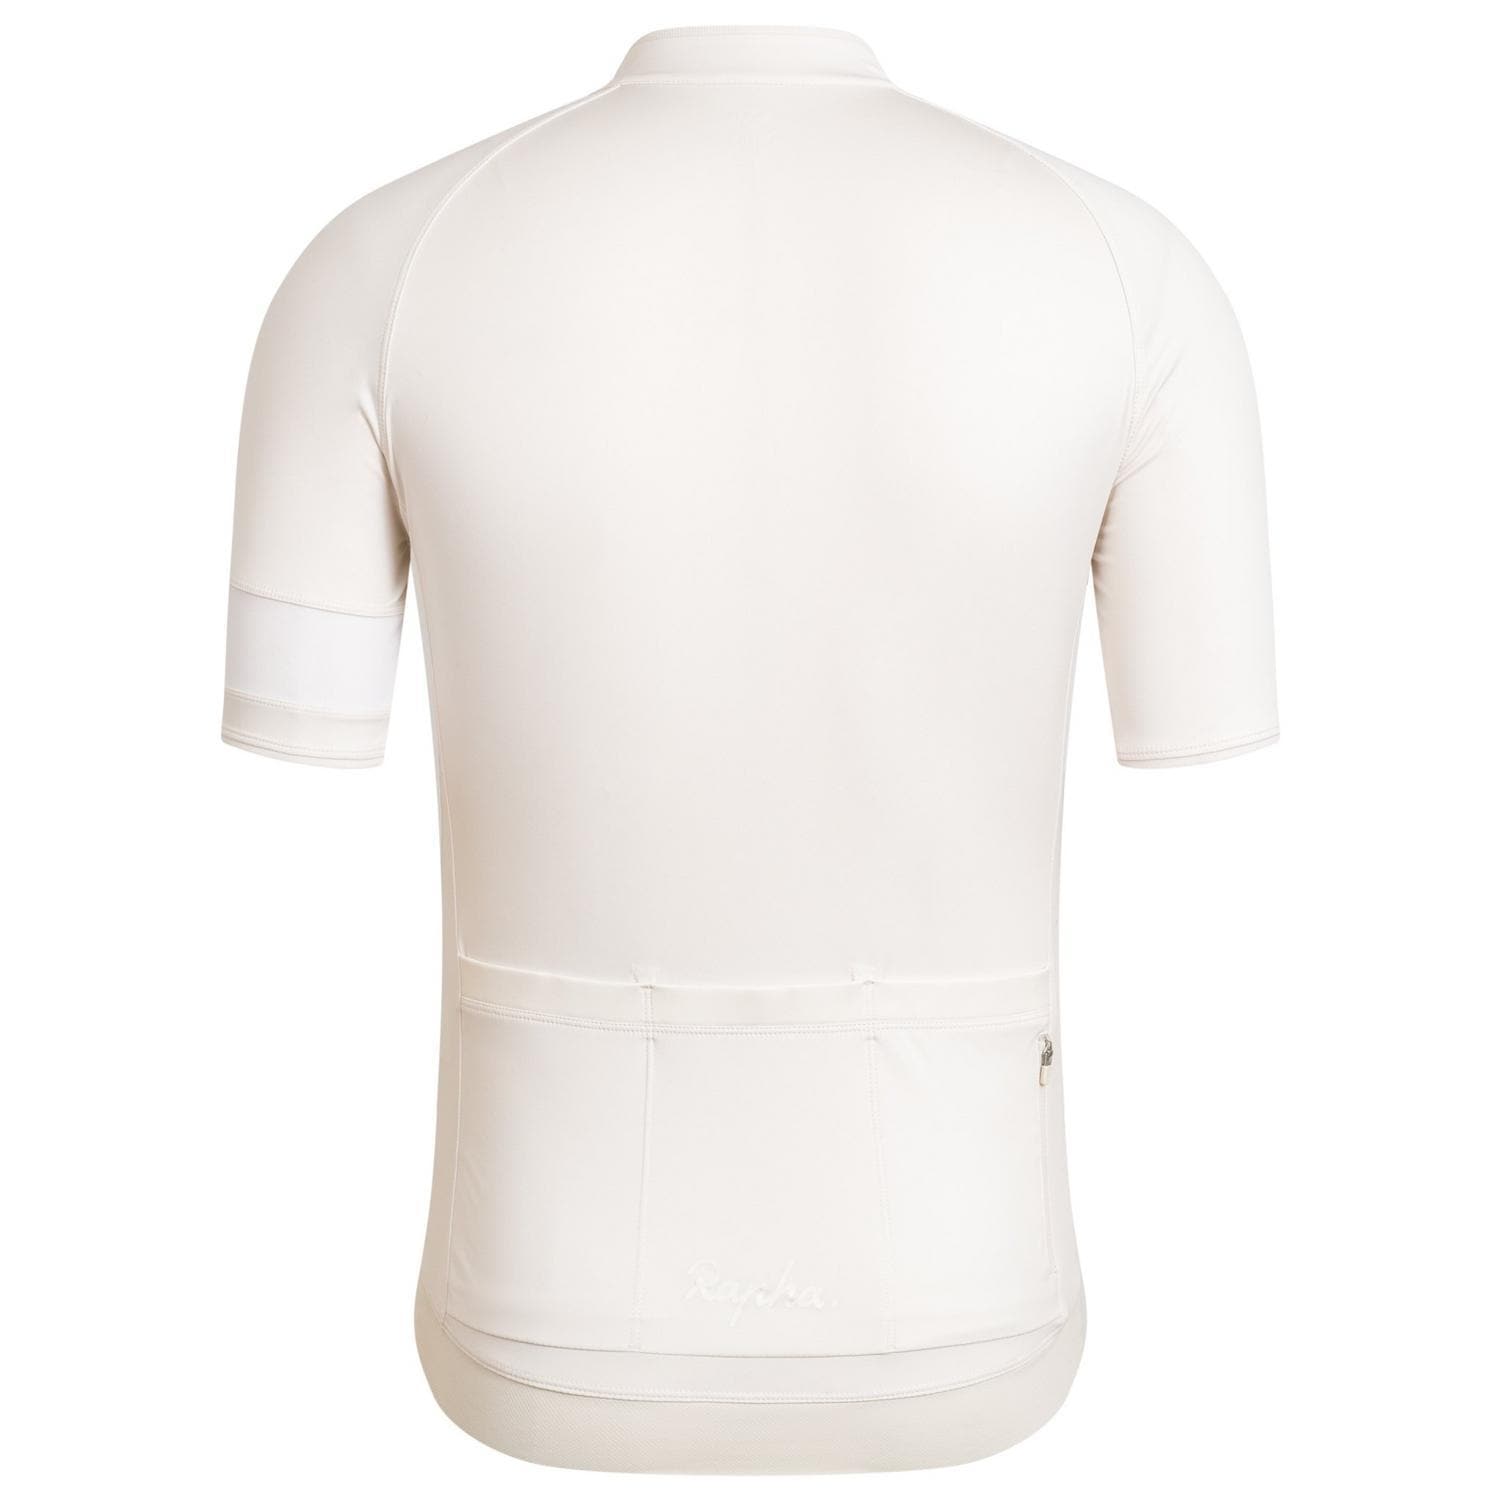 RAPHA Core Jersey - BCH Off White rear panel